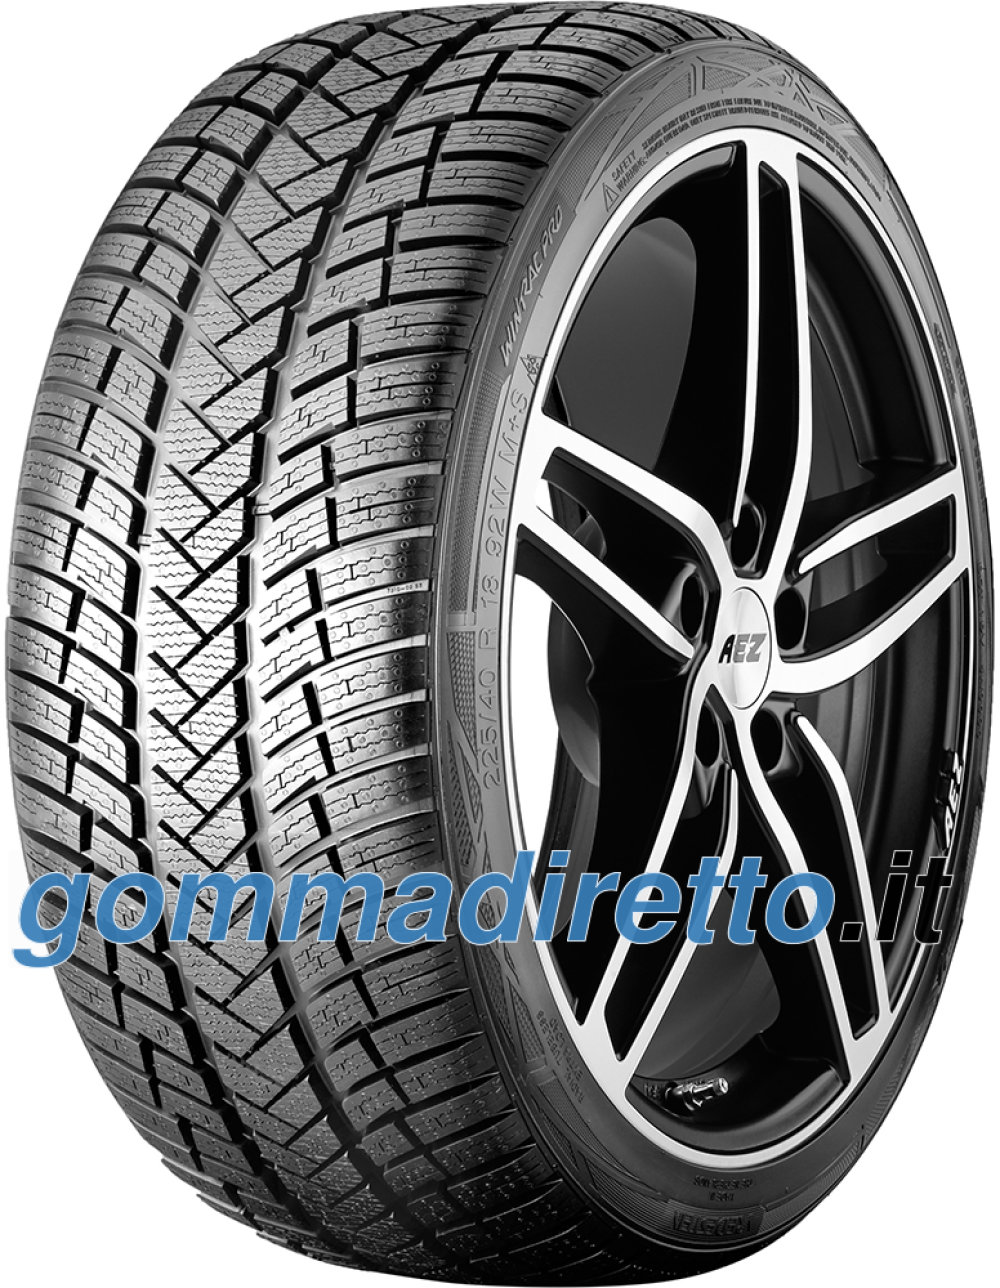 Image of Vredestein Wintrac Pro ( 215/55 R18 99V XL )